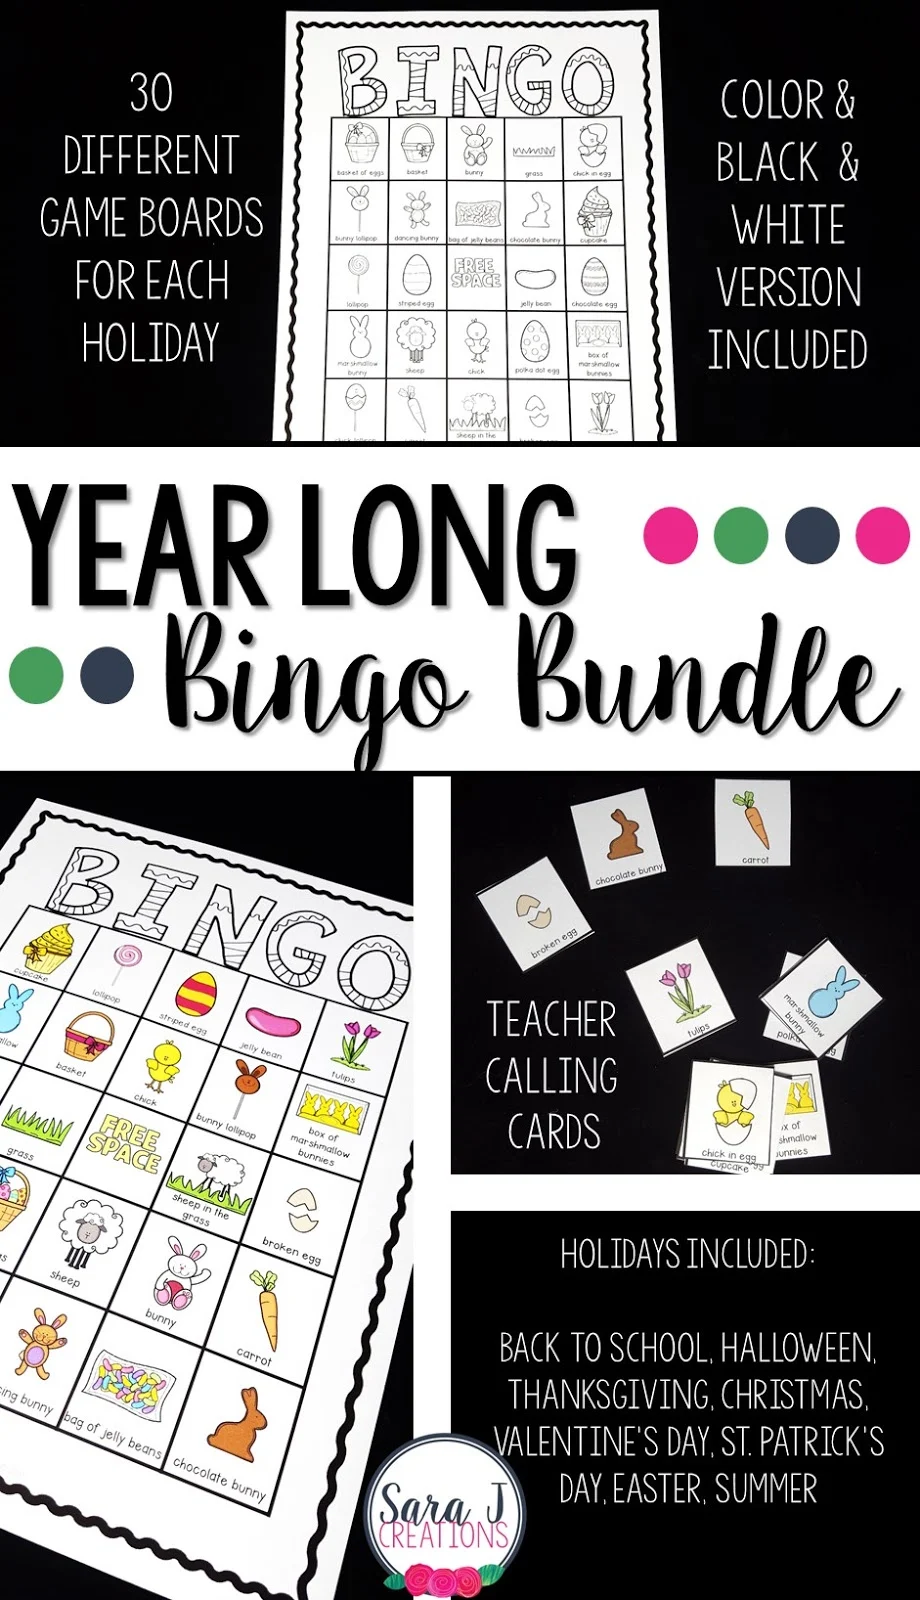 Bingo cards for the whole year!  Includes 8 different sets - Back to School, Halloween, Thanksgiving, Christmas, Valentine's Day, St. Patrick's Day, Easter and Summer.  Play and have fun all year long with these quick and easy to use printables.